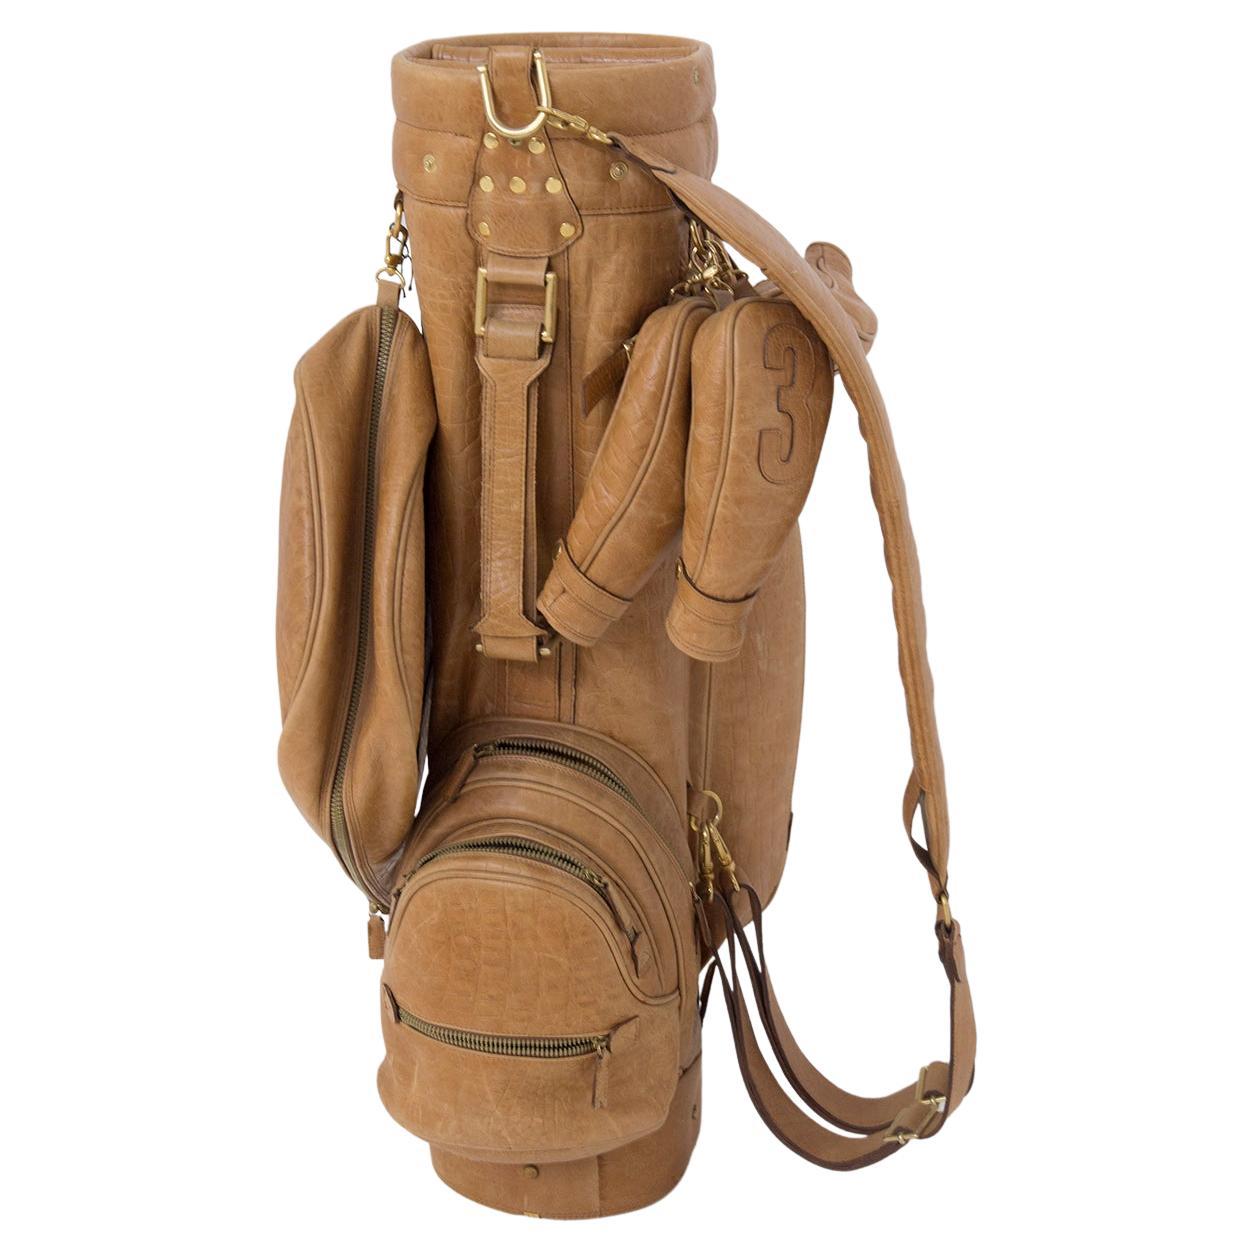 Vintage Faux Reptile Leather Golf Bag For Sale